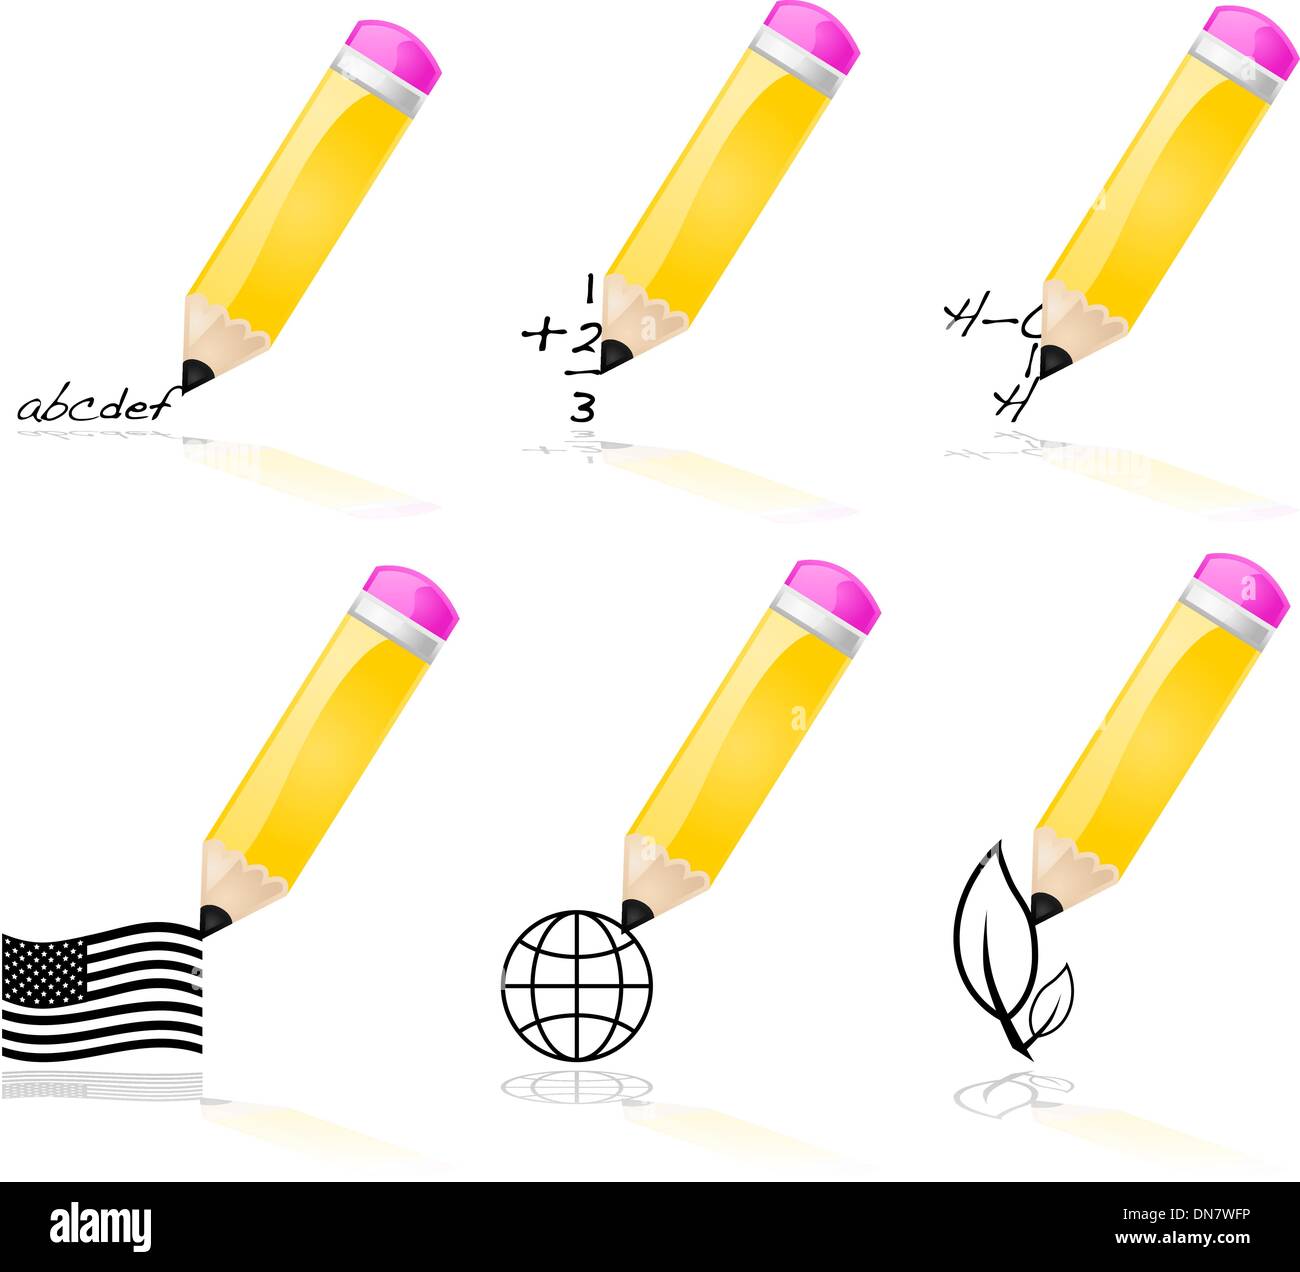 Pencil and school subjects Stock Vector